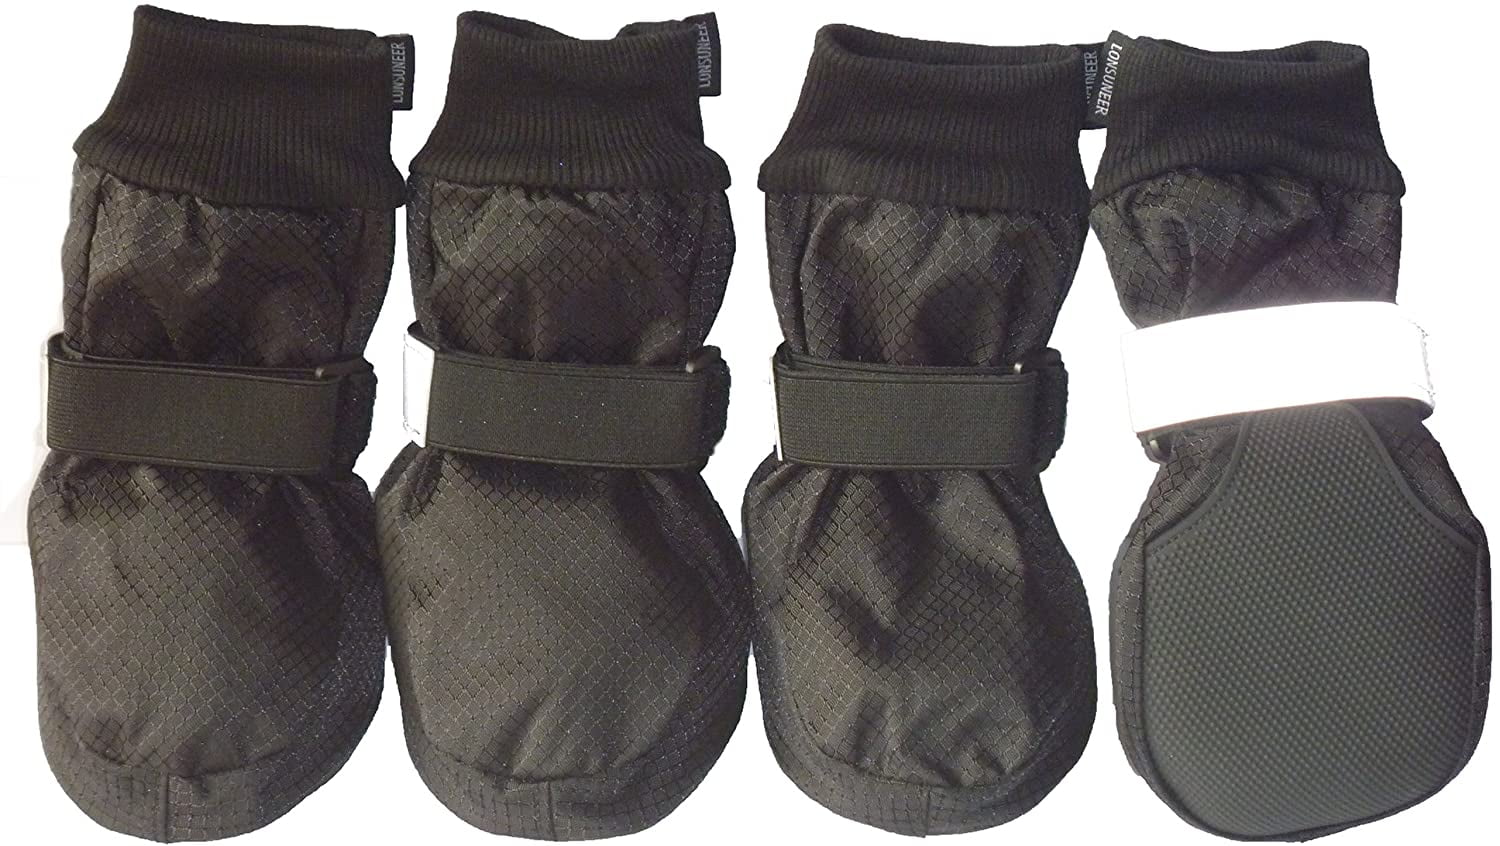 LONSUNEER Paw Protector Dog Boots Soft Sole Nonslip Safe Reflective Set of 4 